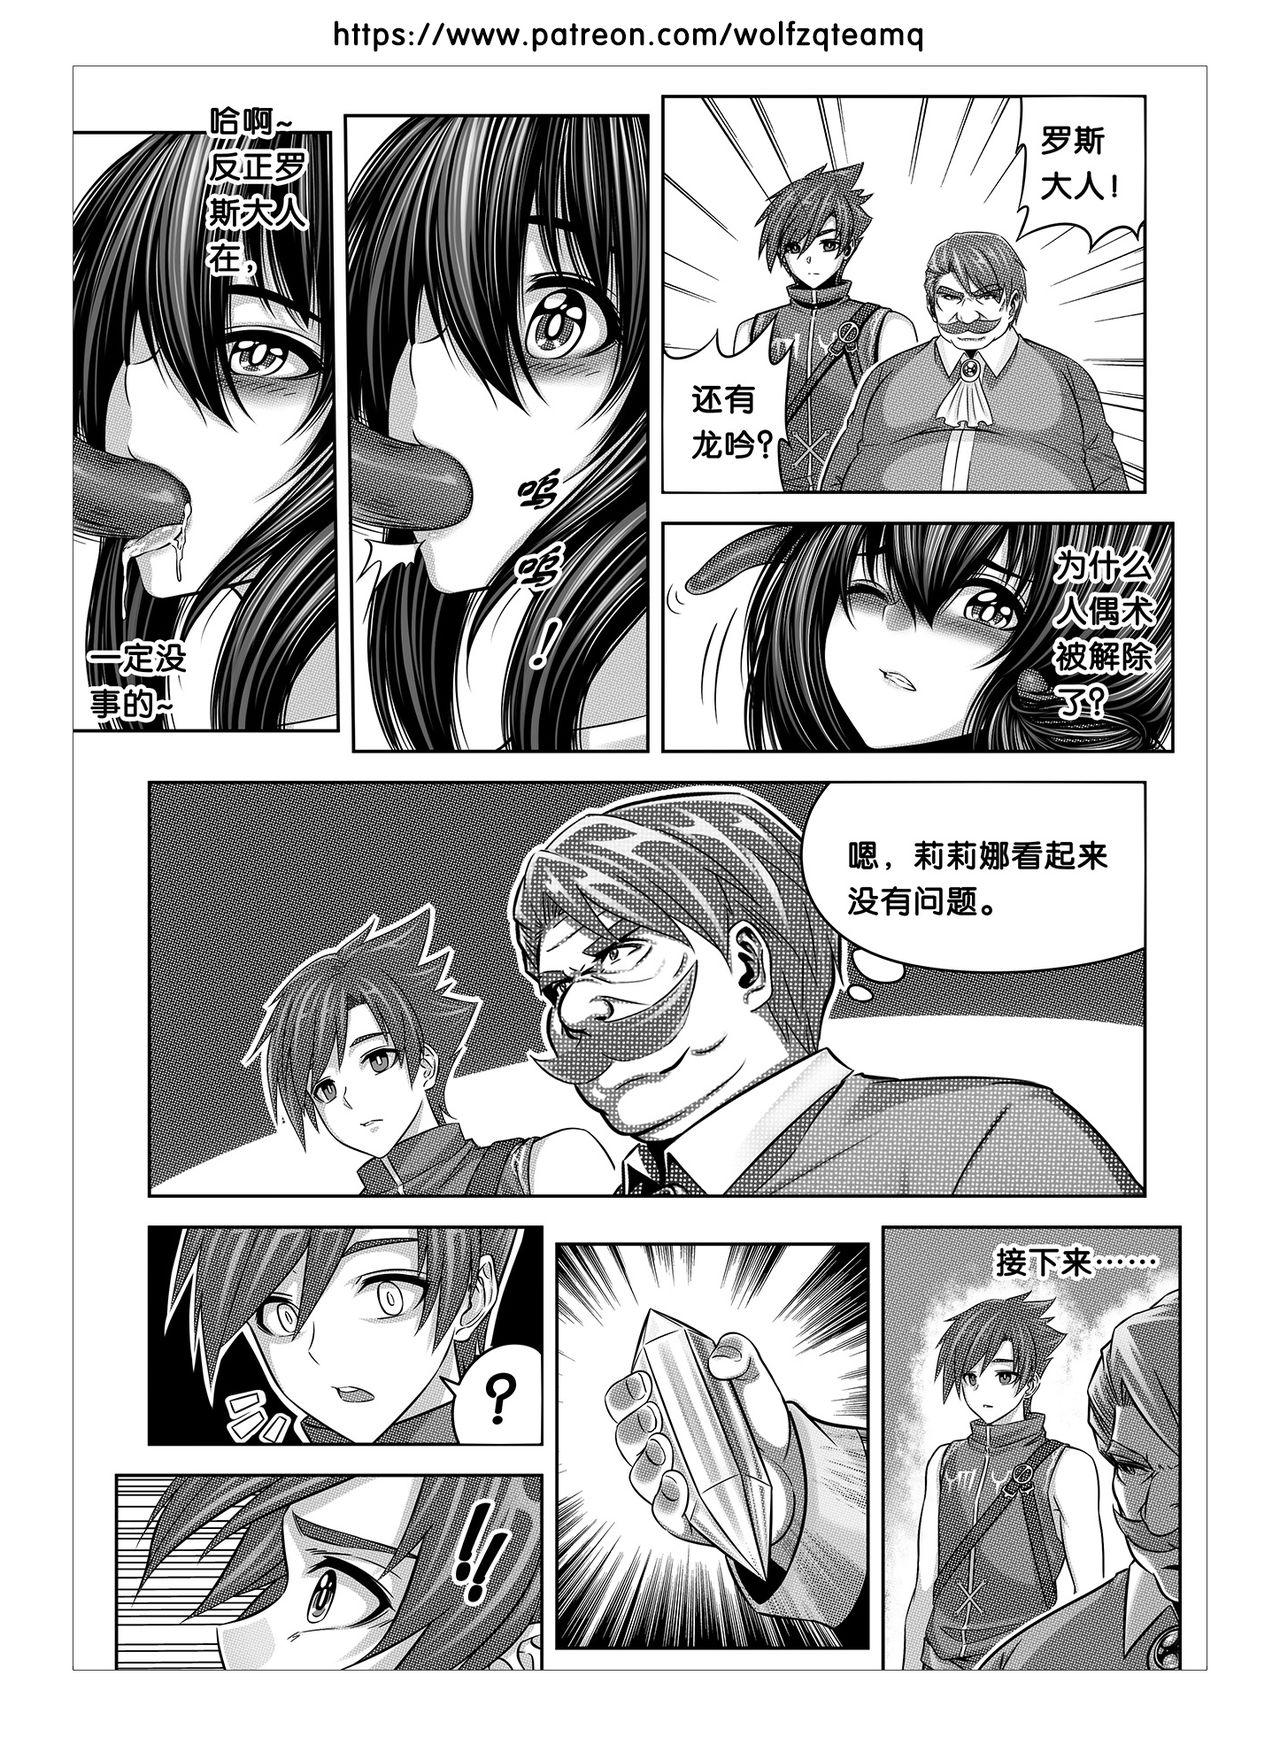 Hot Bad End Of Cursed Armor College Line（诅咒铠甲学院线）Chinese Brunettes - Page 8